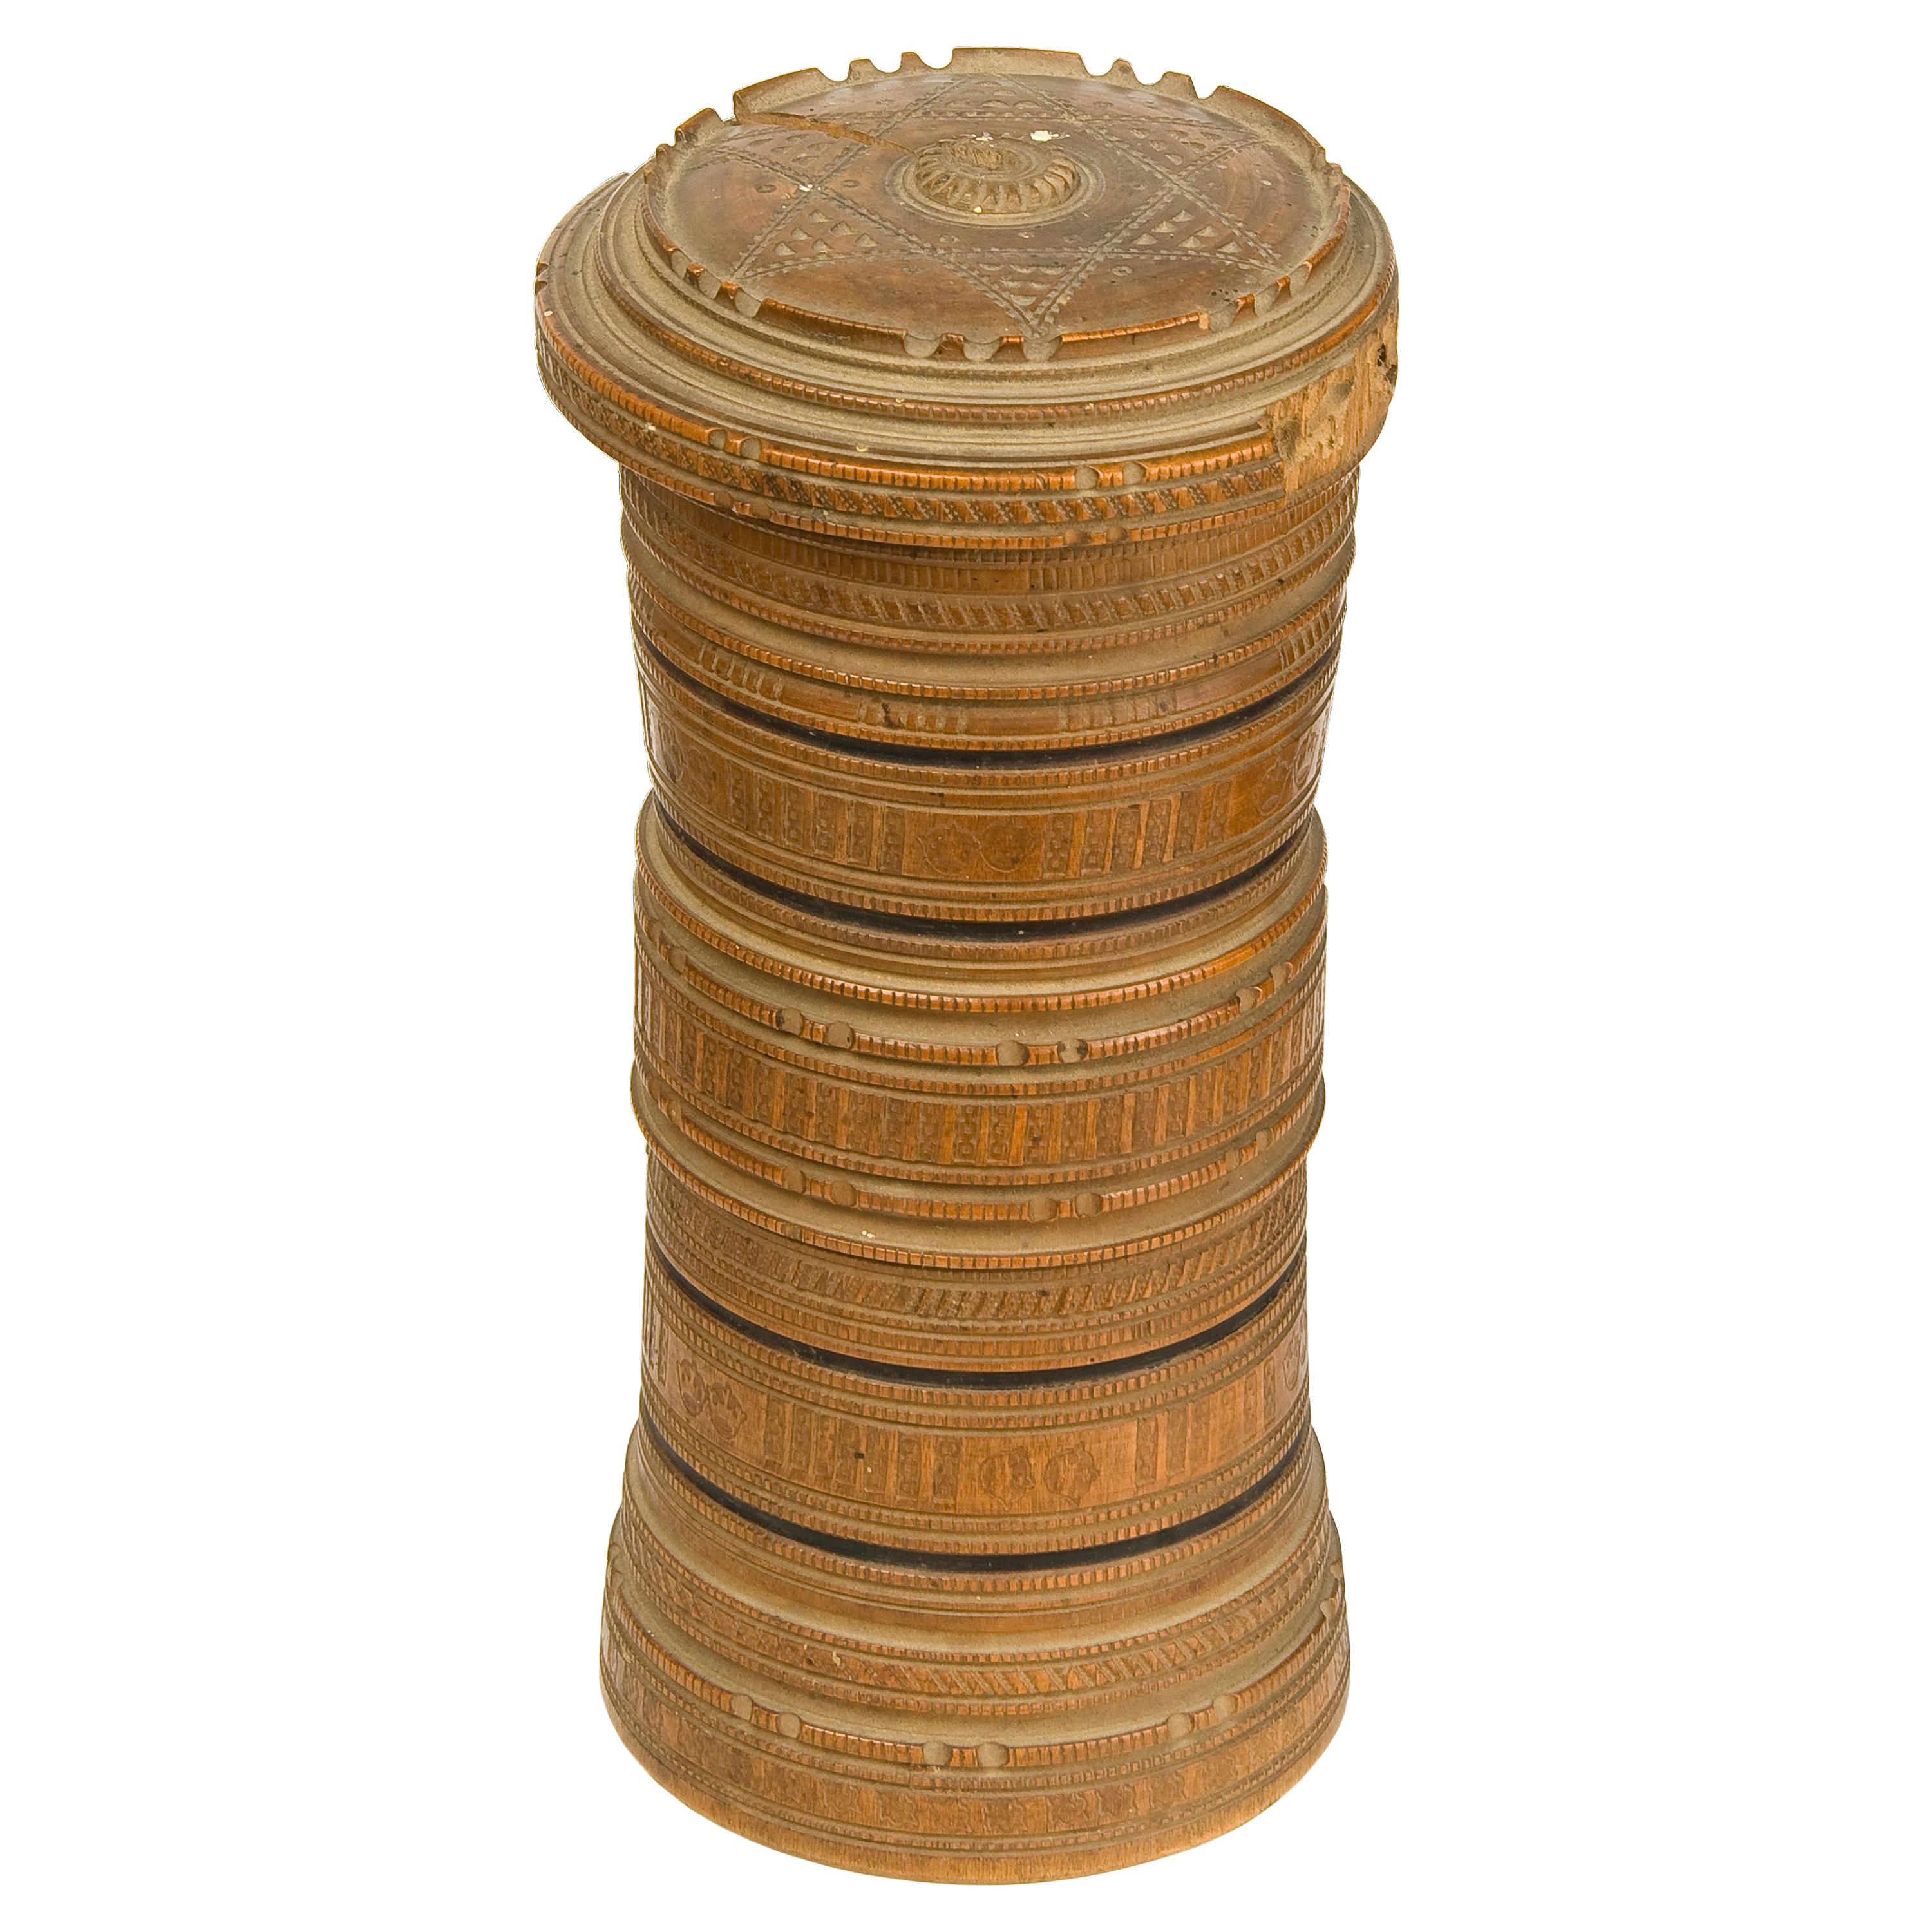 Wood Turner Test Cilindrical Box, 17th-18th Centuries For Sale